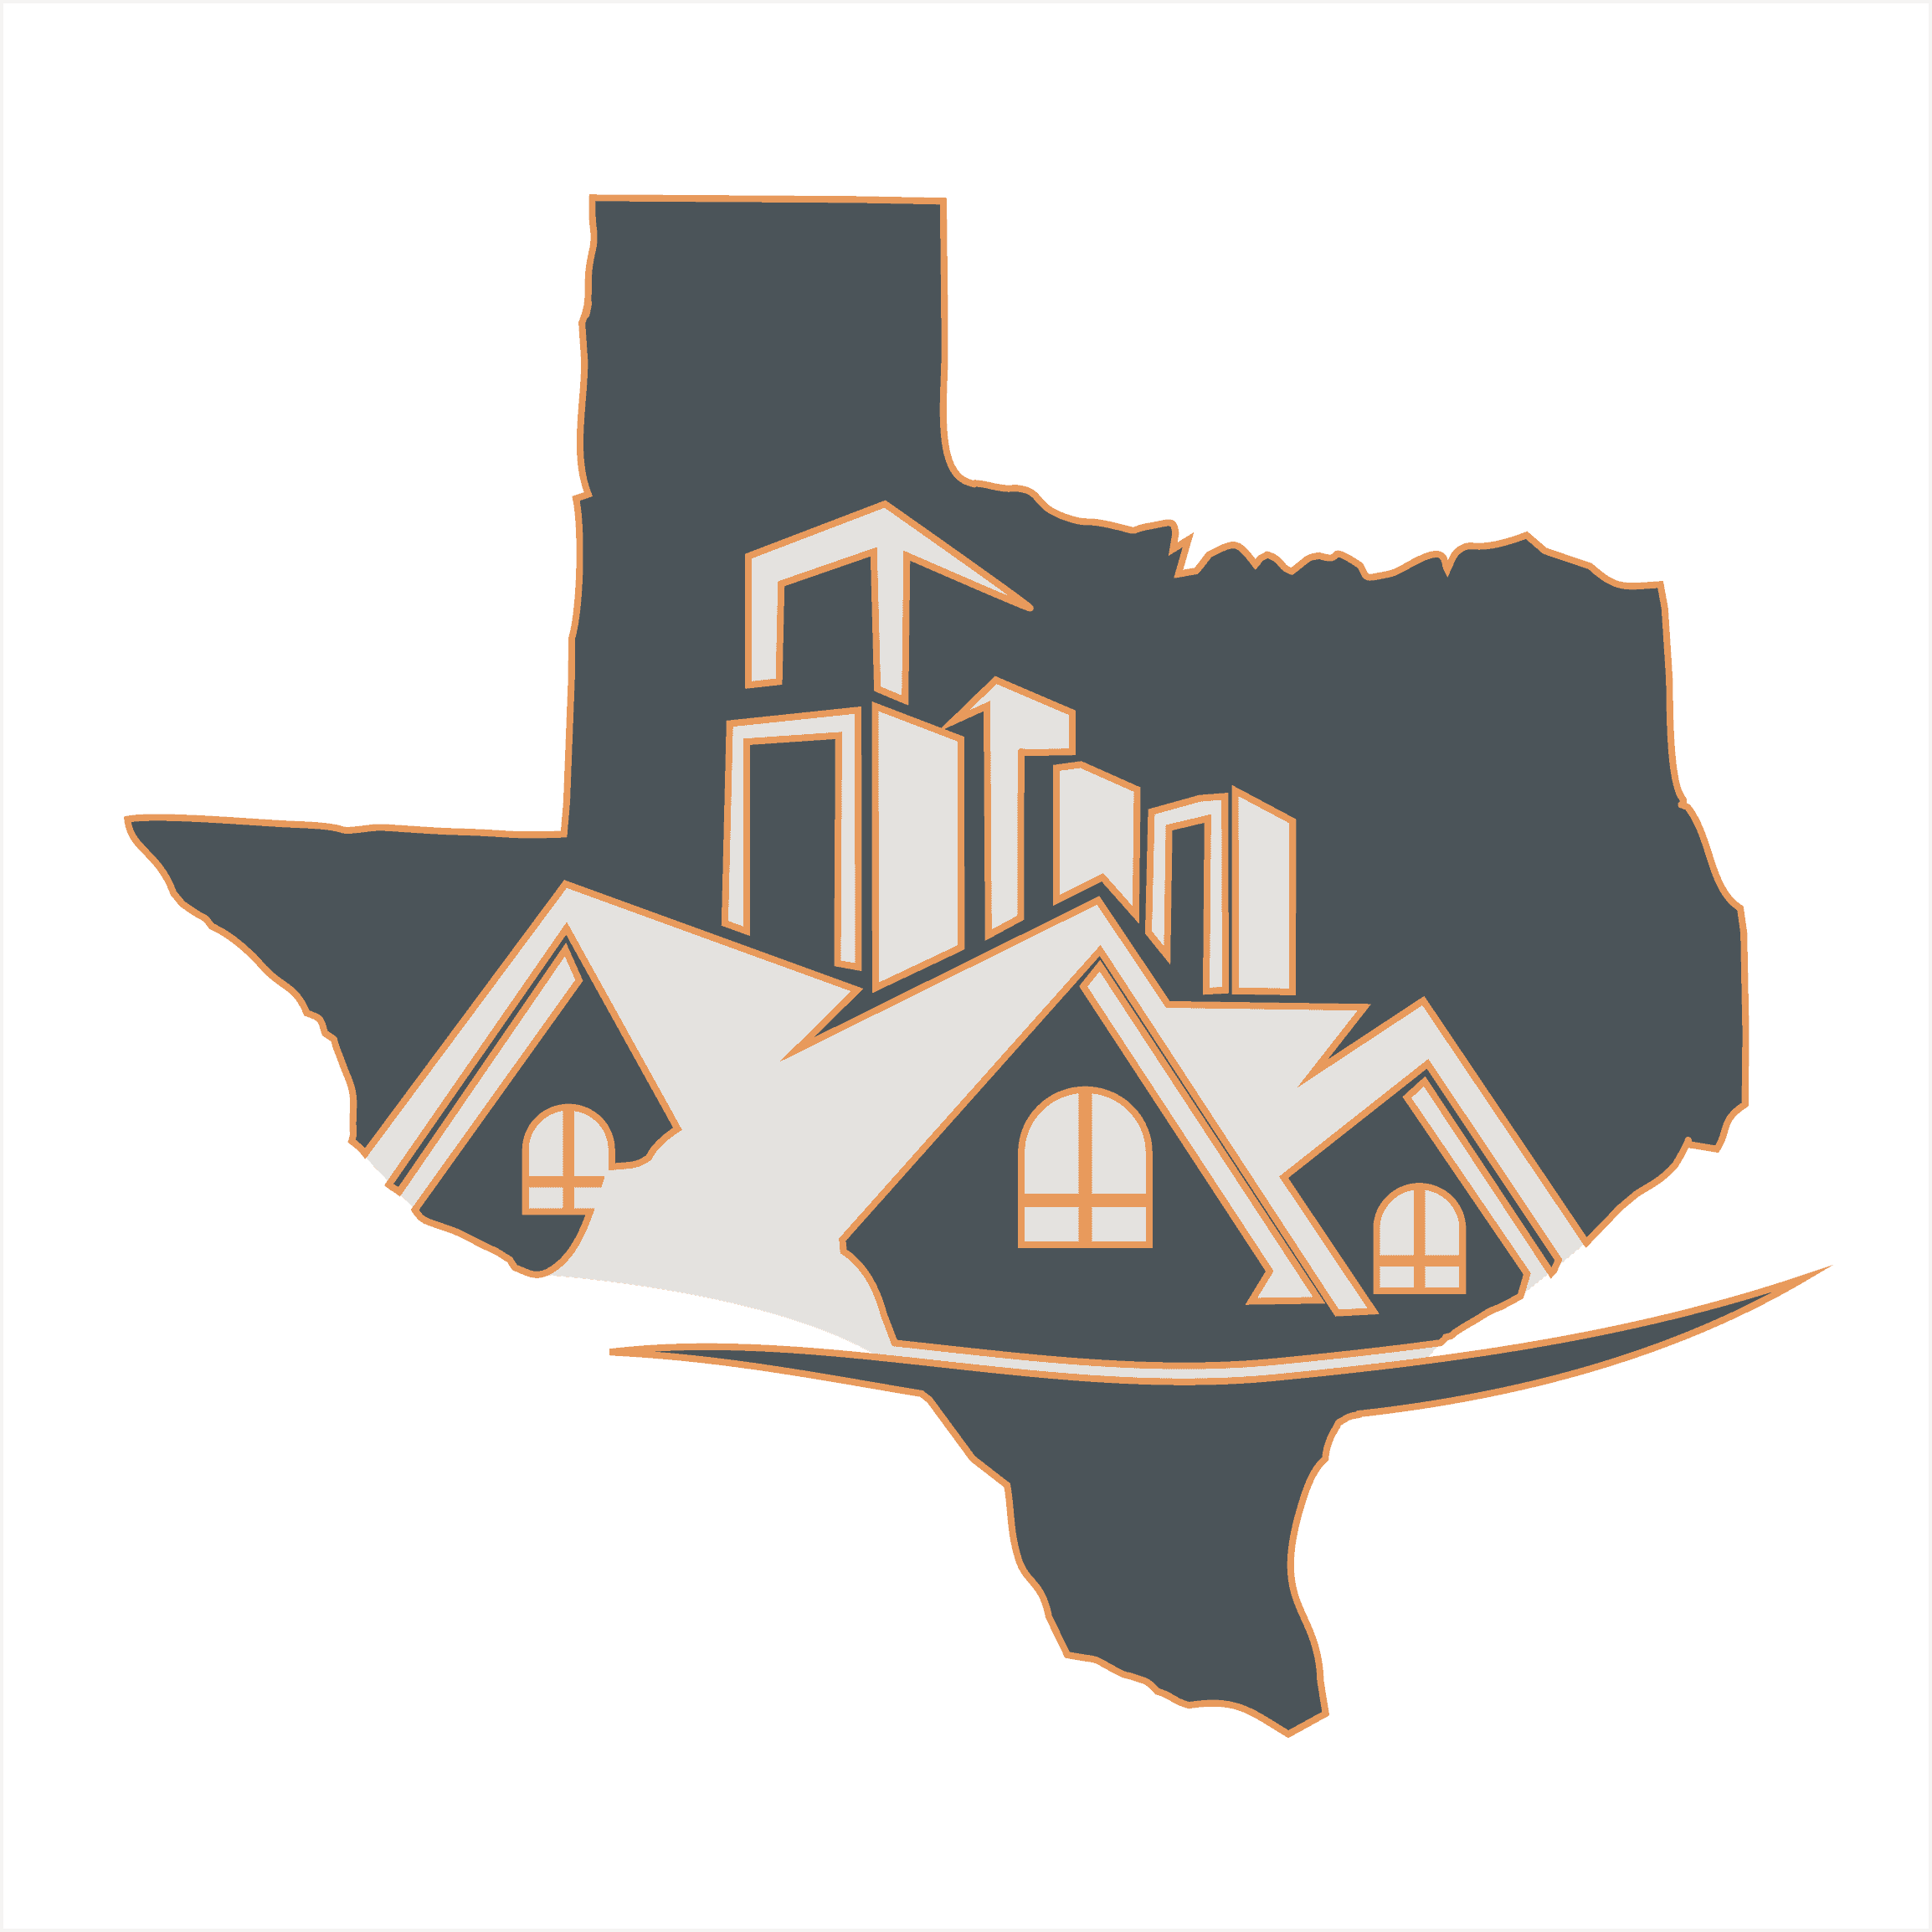 Central Texas Homes & Businesses